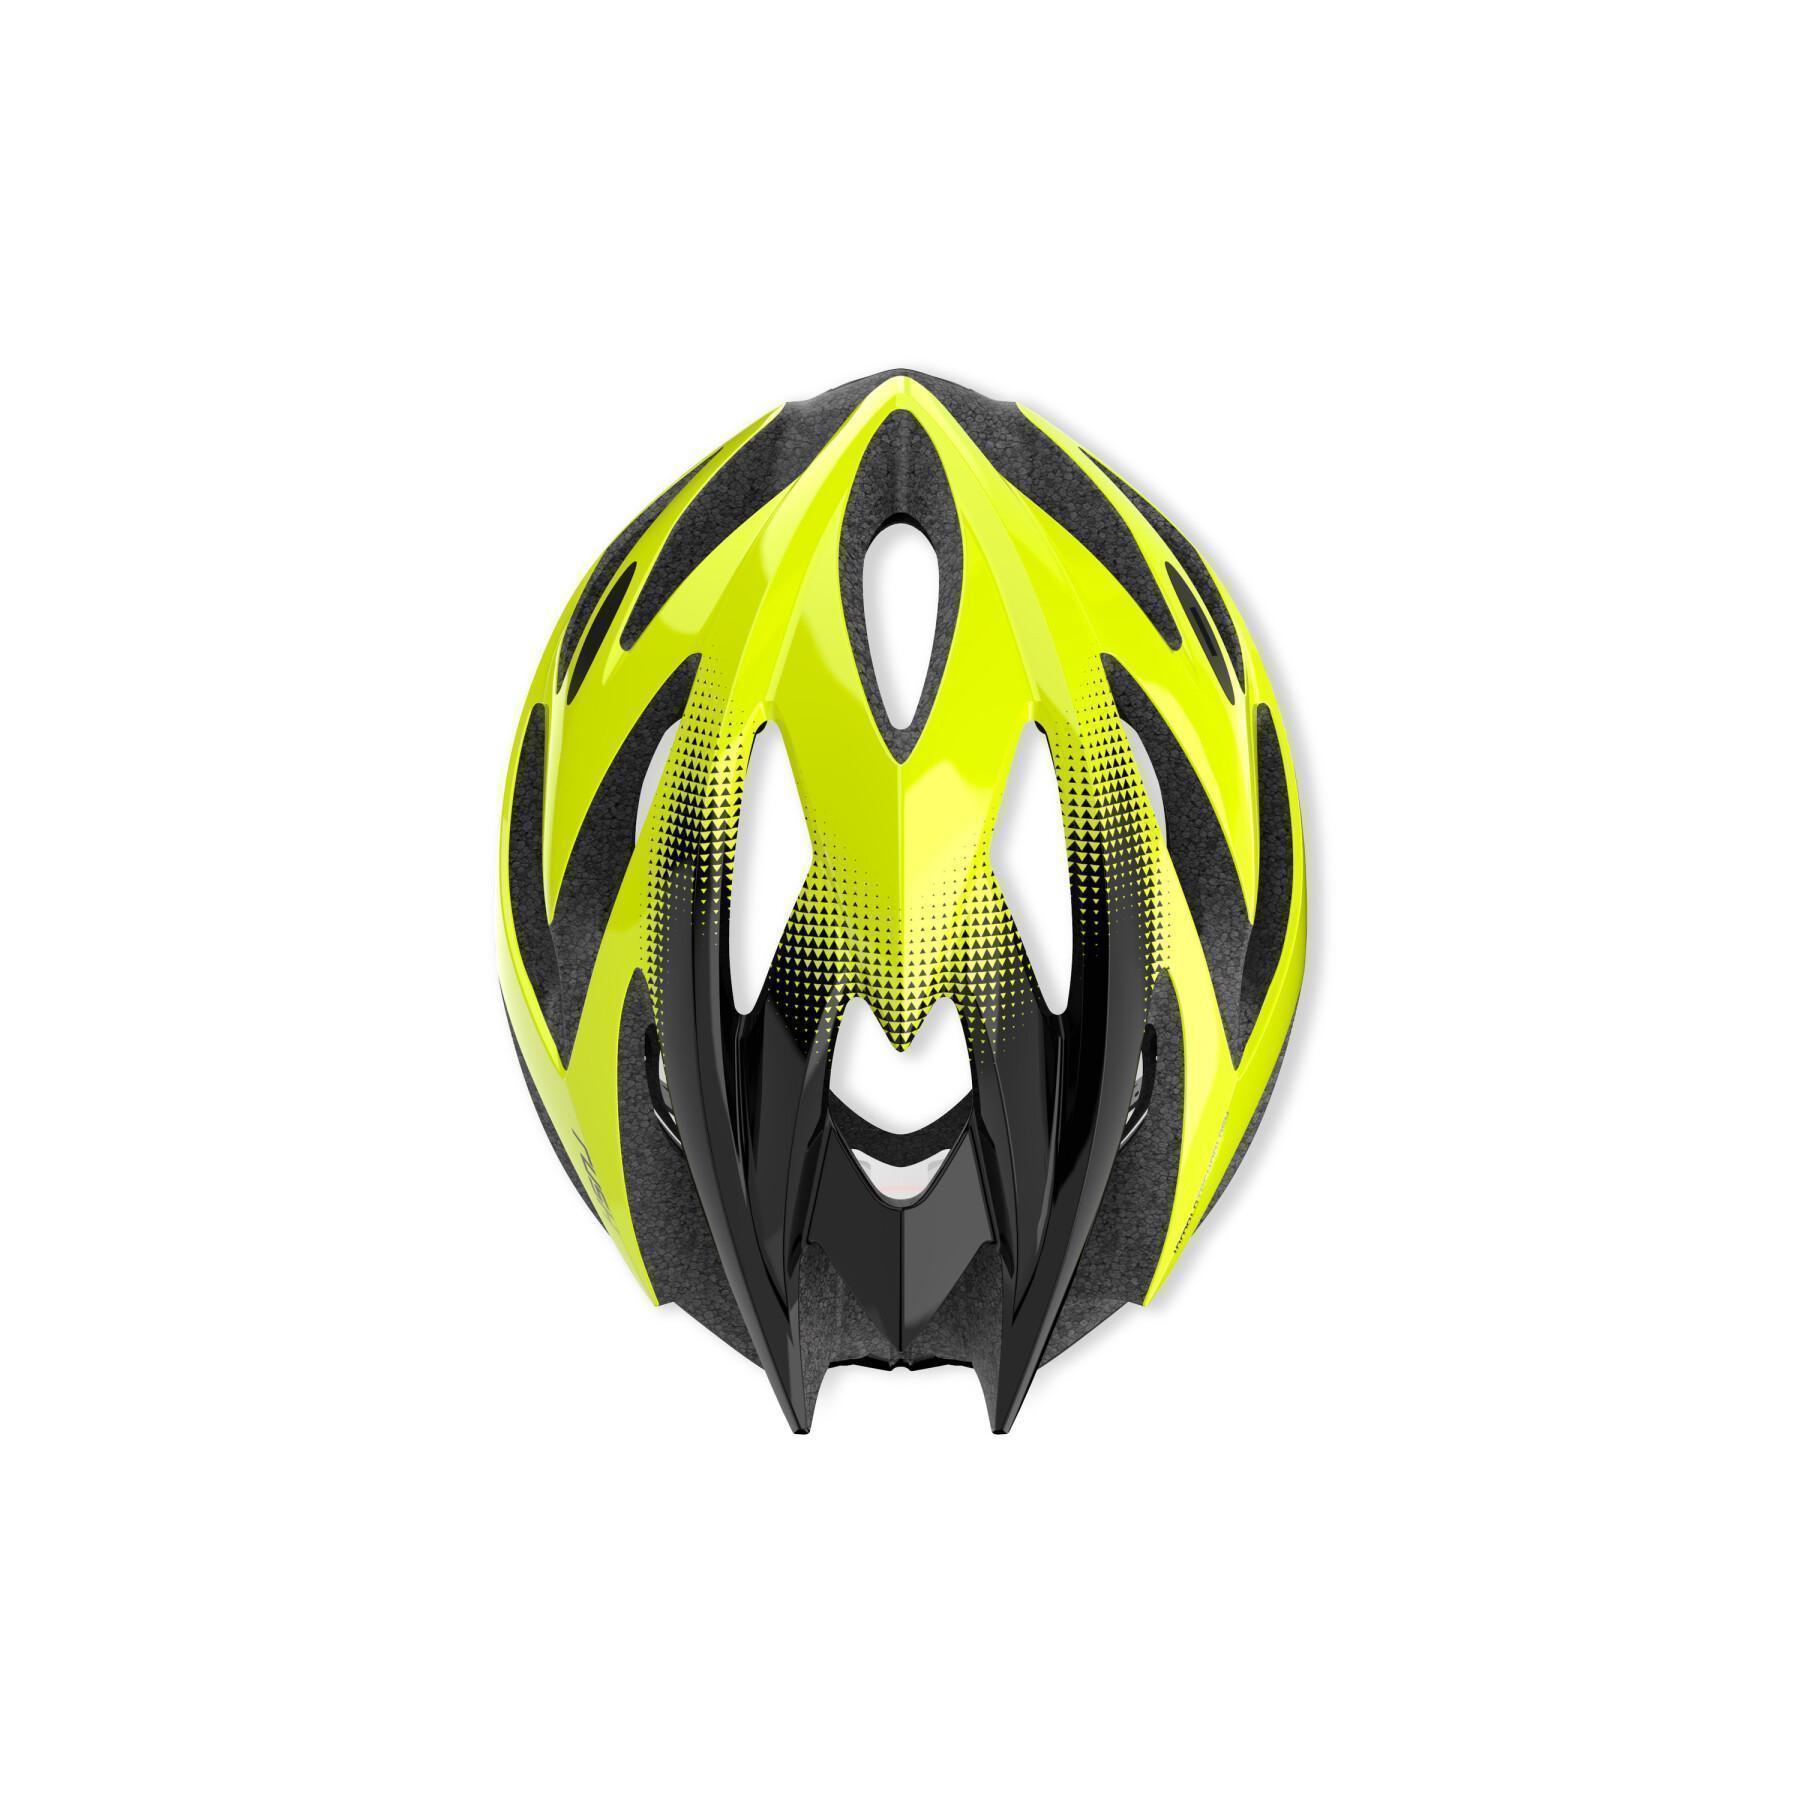 Casque vélo Rudy Project Rush